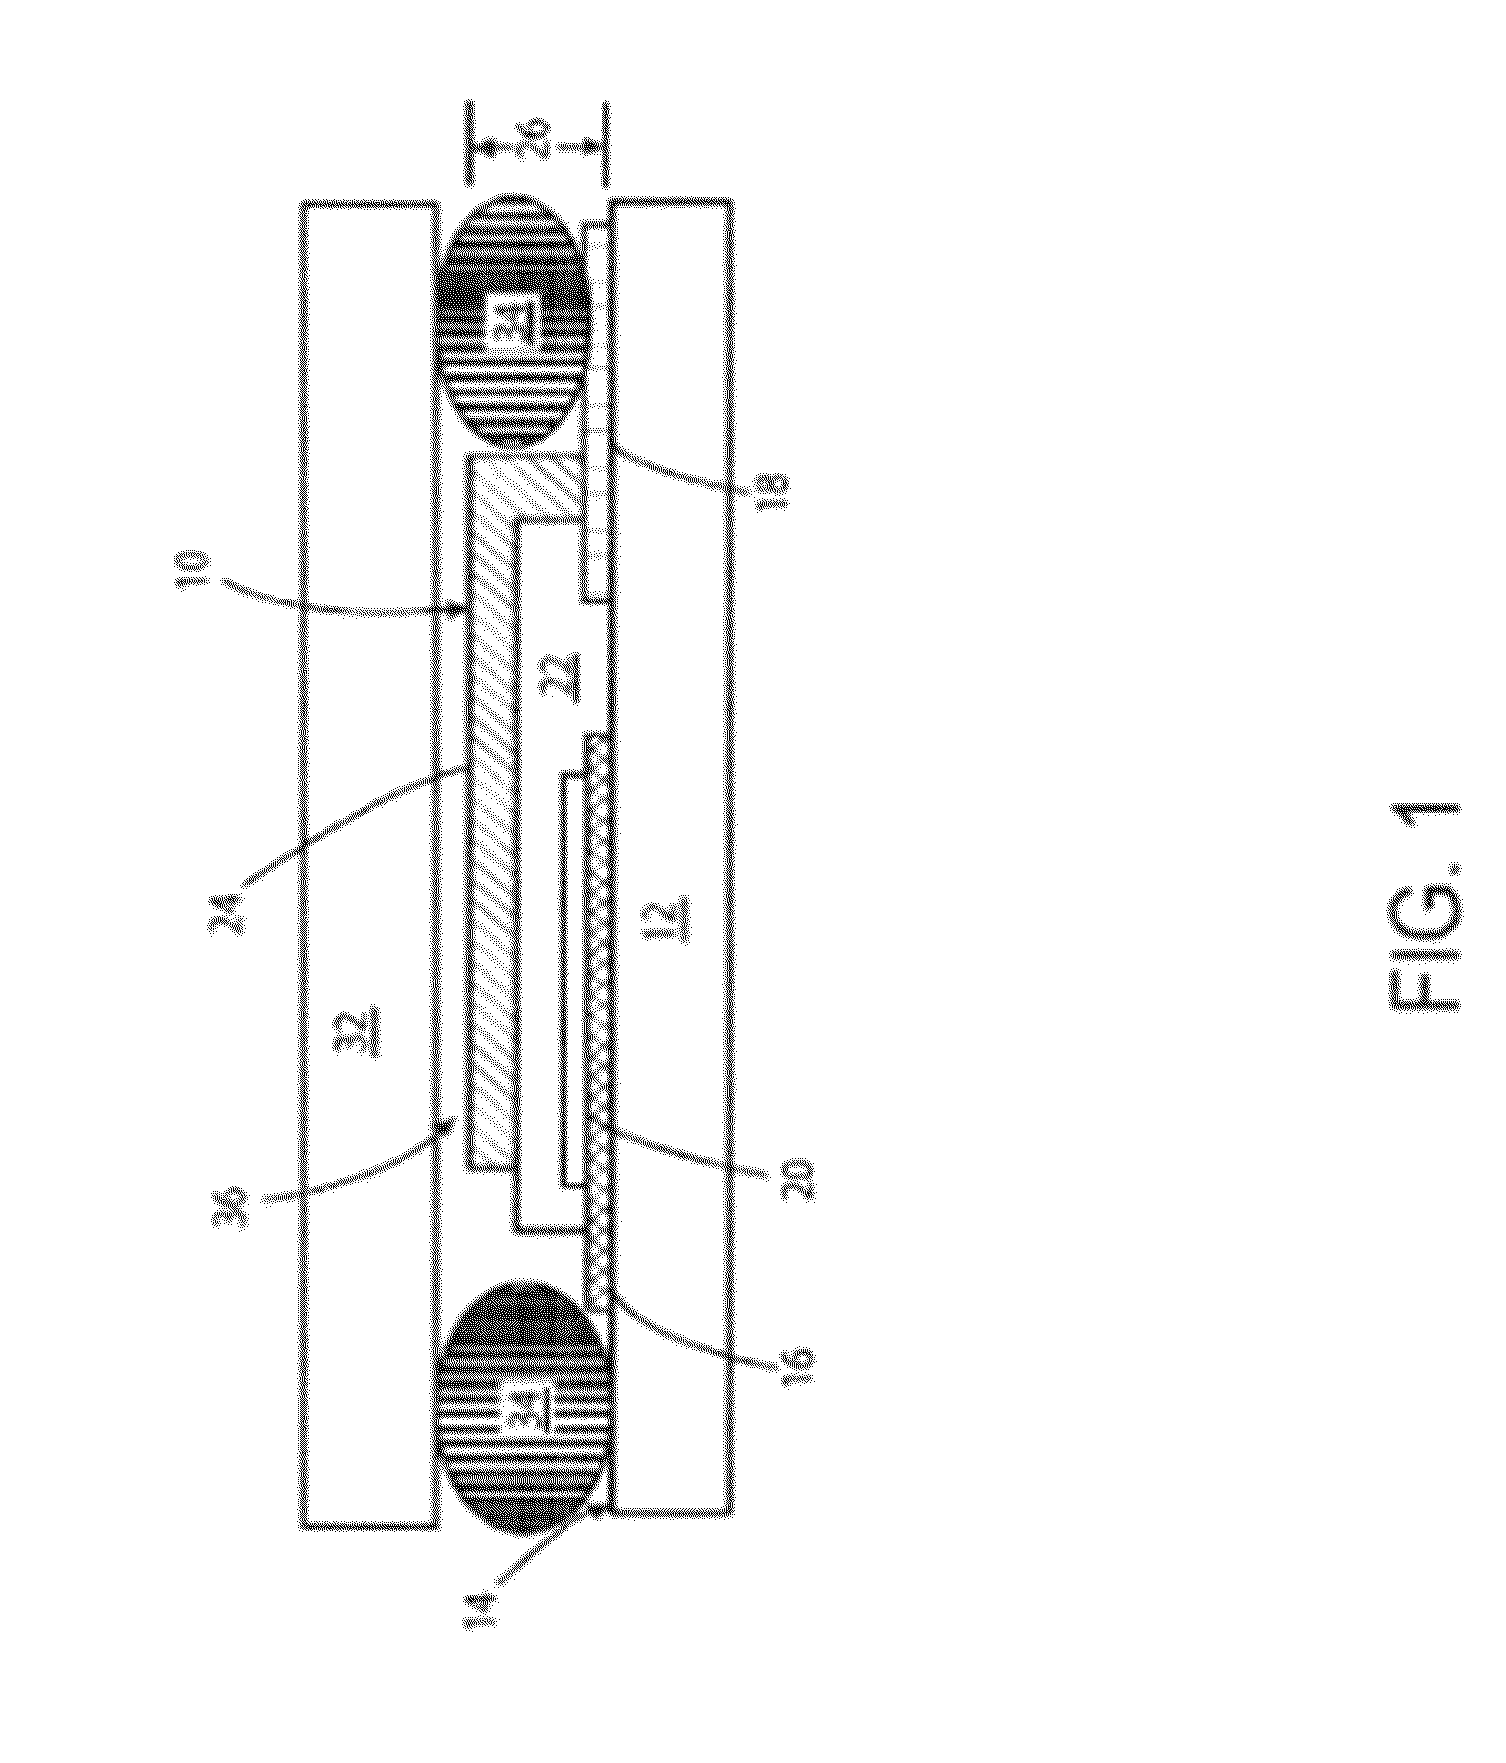 Electric vehicle propulsion system and method utilizing solid-state rechargeable electrochemical cells